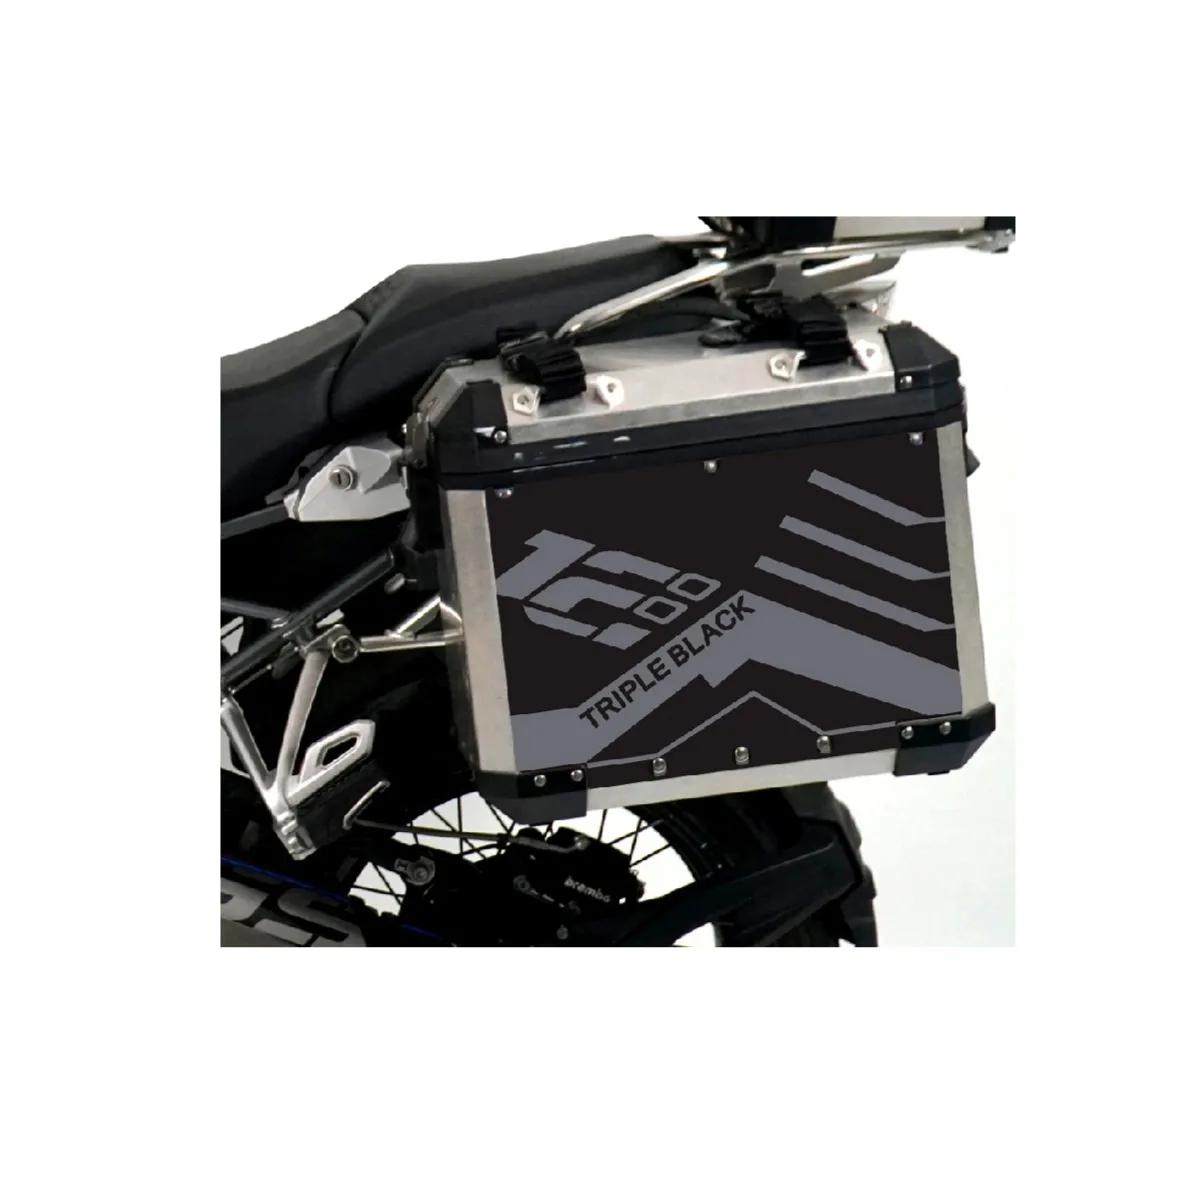 Motorcycle Reflective Decal Case for BMW ALUMINIUM PANNIERS Protector Sticker R1200GS R1200 GS ADV ADVENTURE 2004-2021